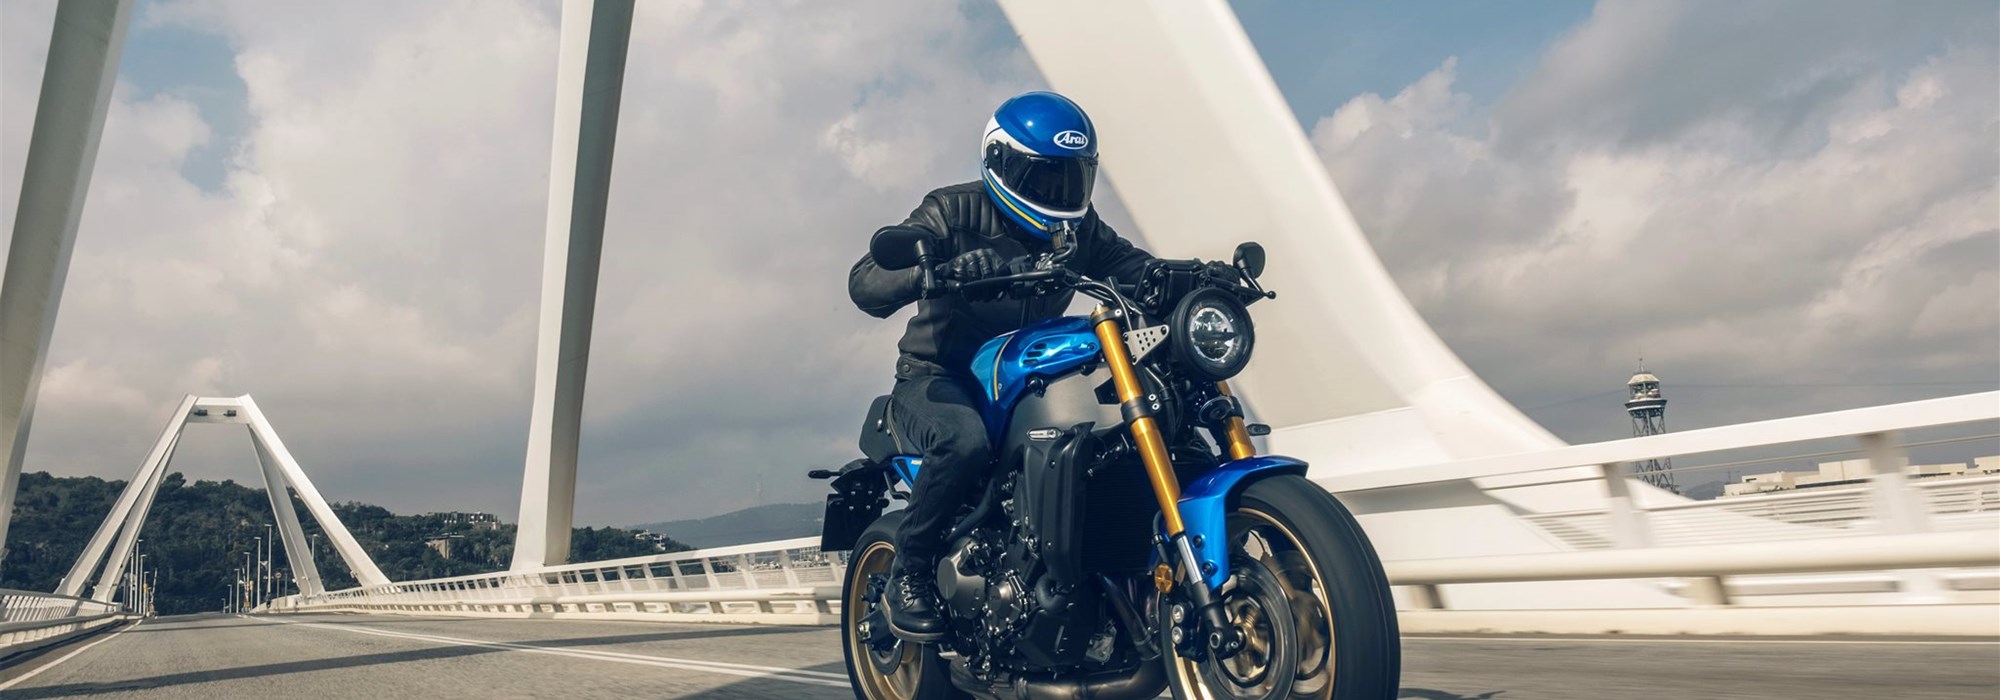 Yamaha XSR900 - Faster Sons